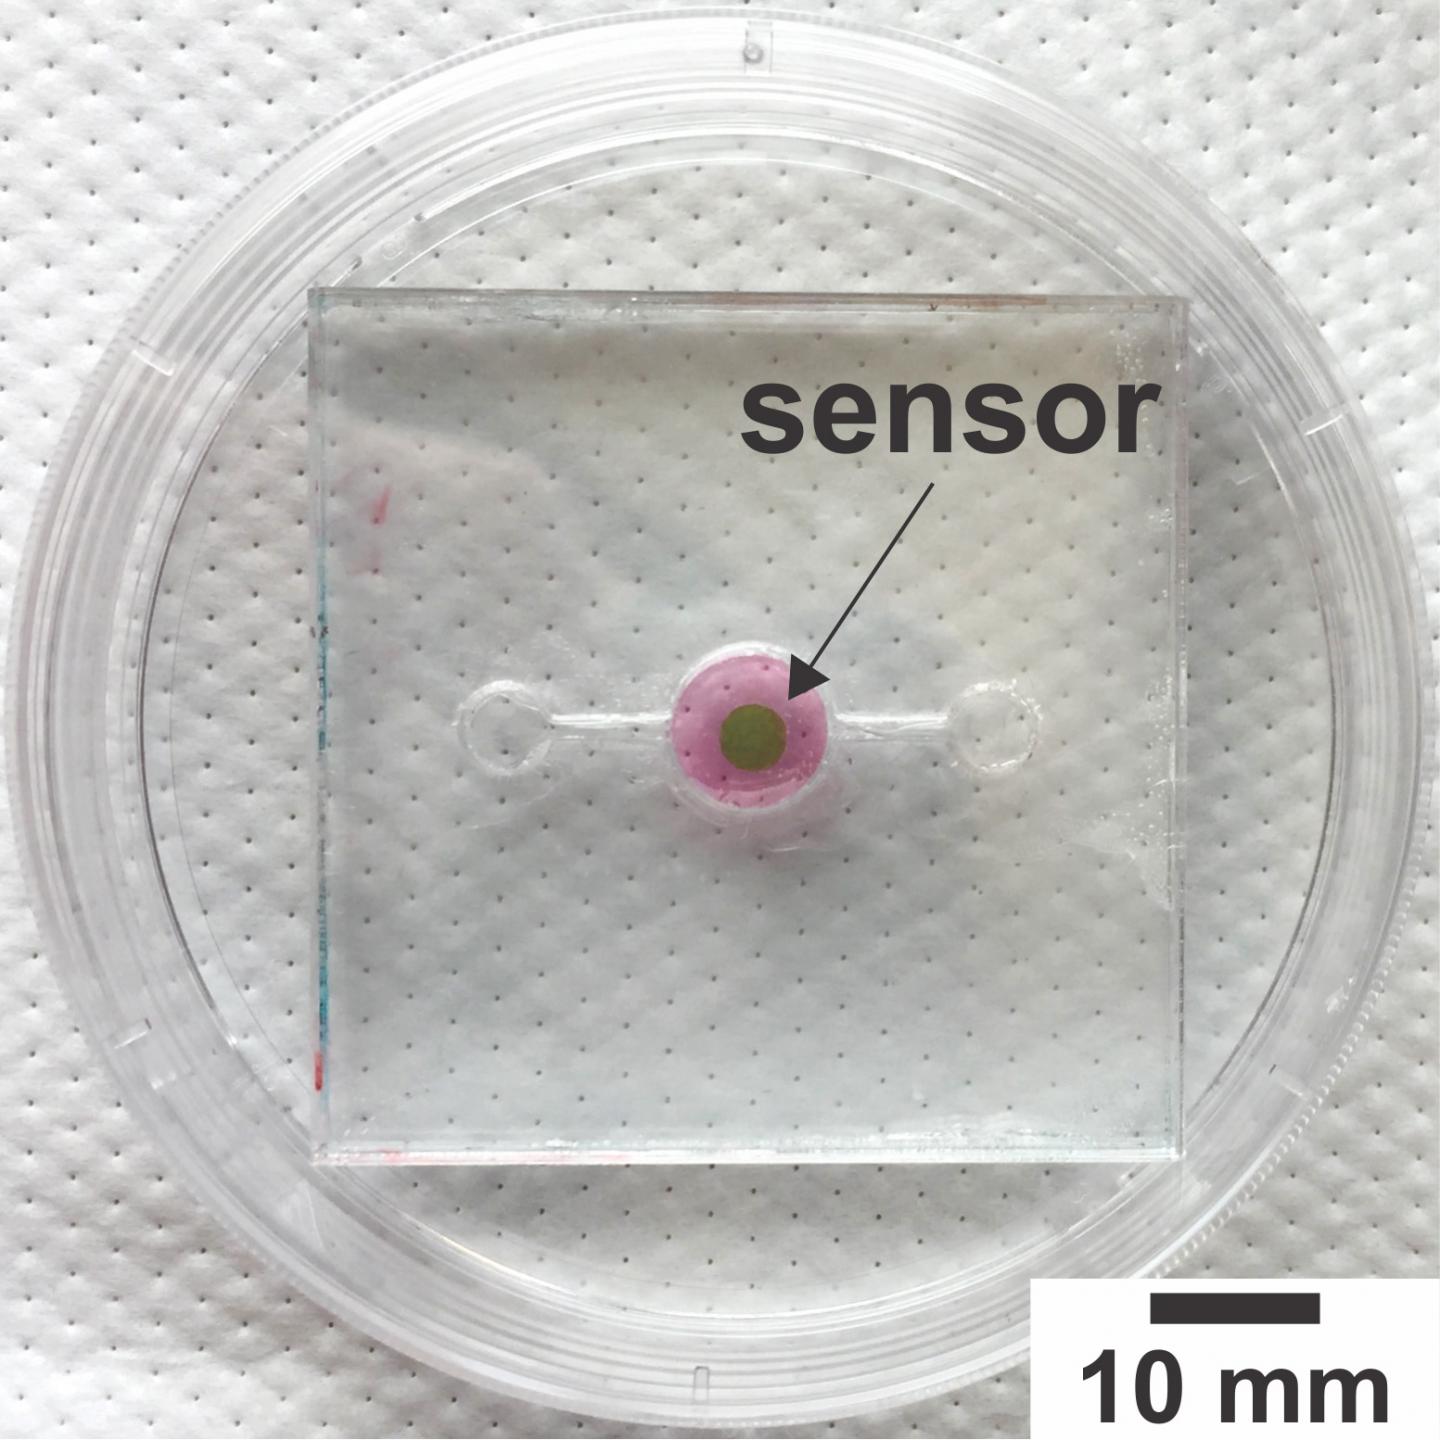 Tracking Oxygen Levels in Organs-On-A-Chip